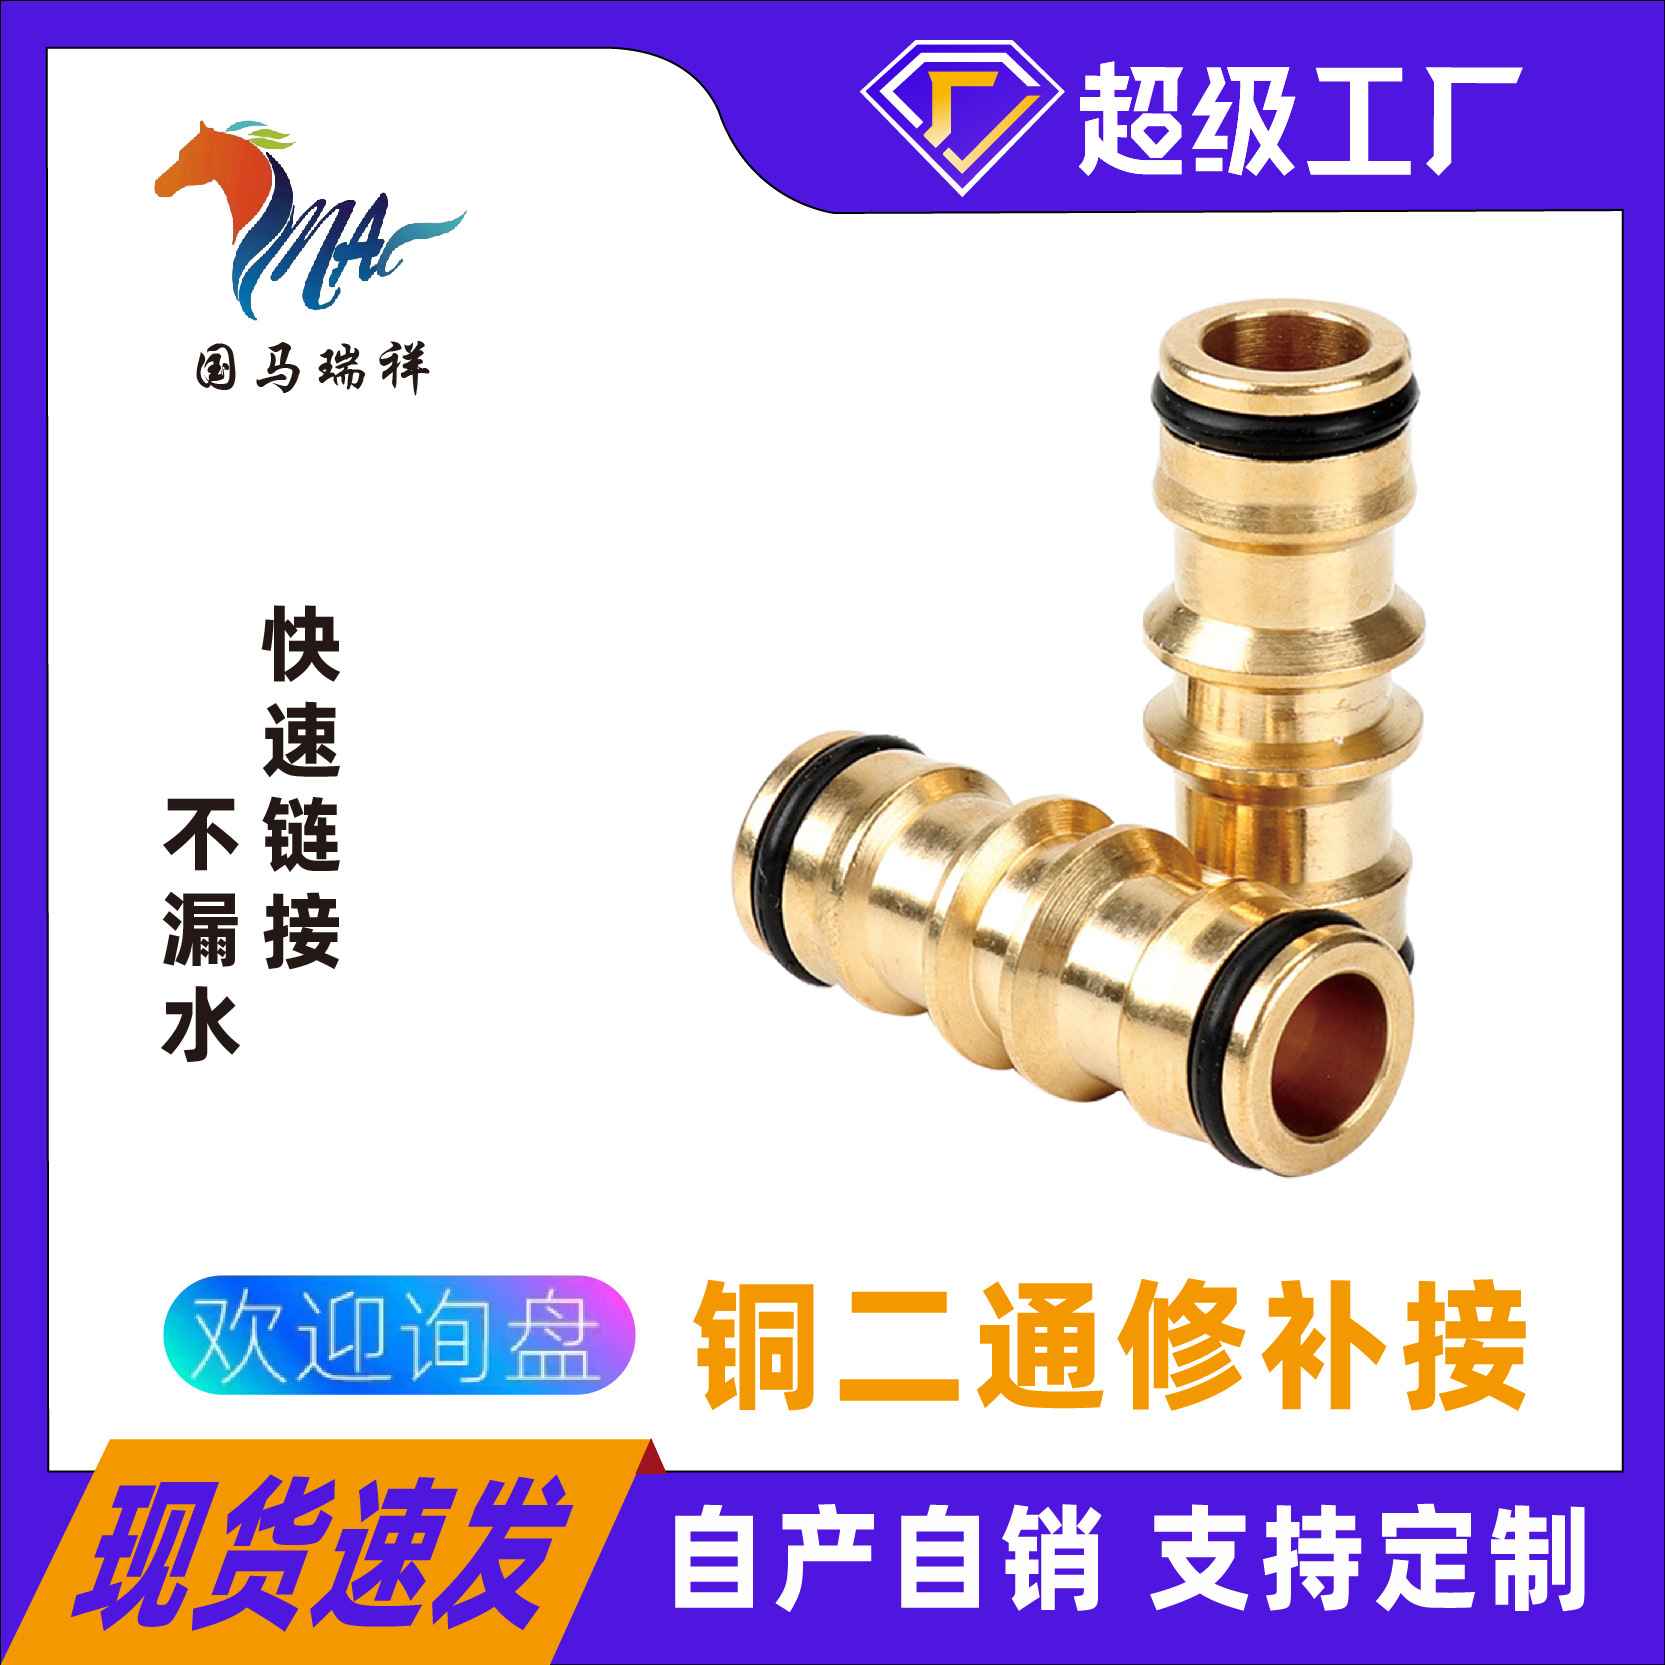 Guoma Ruixiang Pure Copper Four-Point Nipple Two-Way Pair Water Pipe Quick Repair Quick Connection Nipple Water Pipe Repair